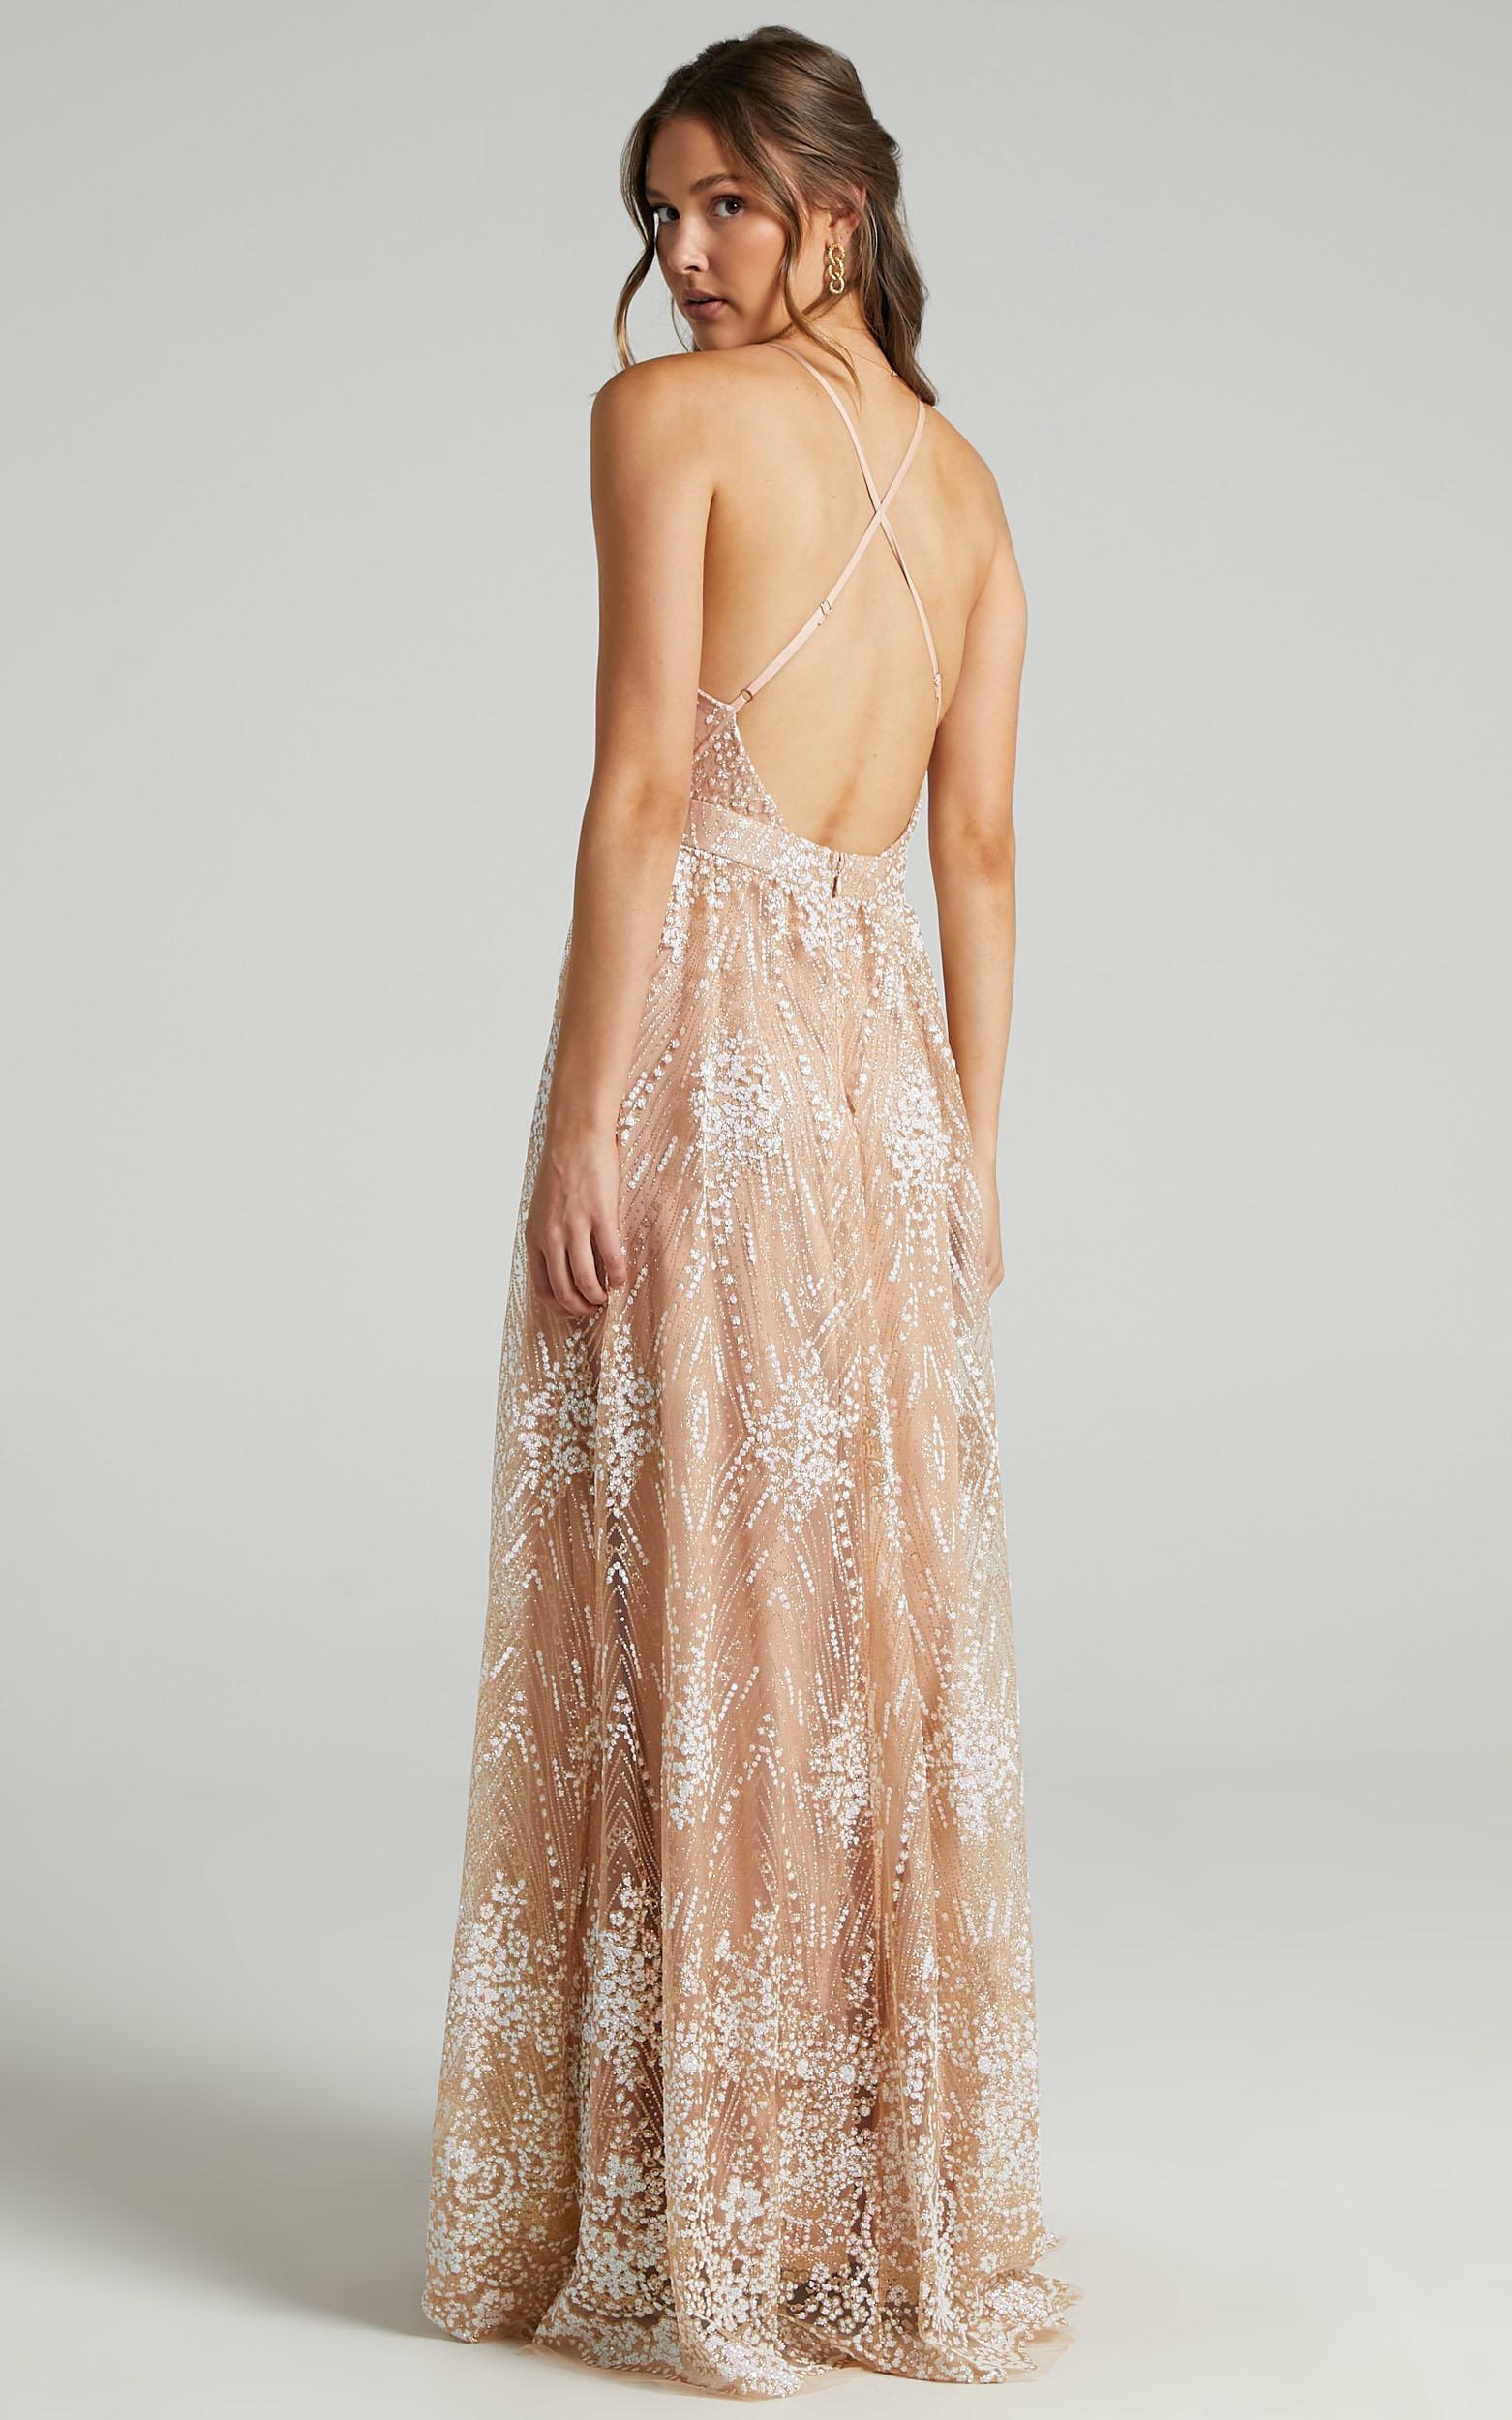 Her Crystal Eyes Maxi Dress in Rose Gold Glitter Tulle - 12, RSG1, hi-res image number null